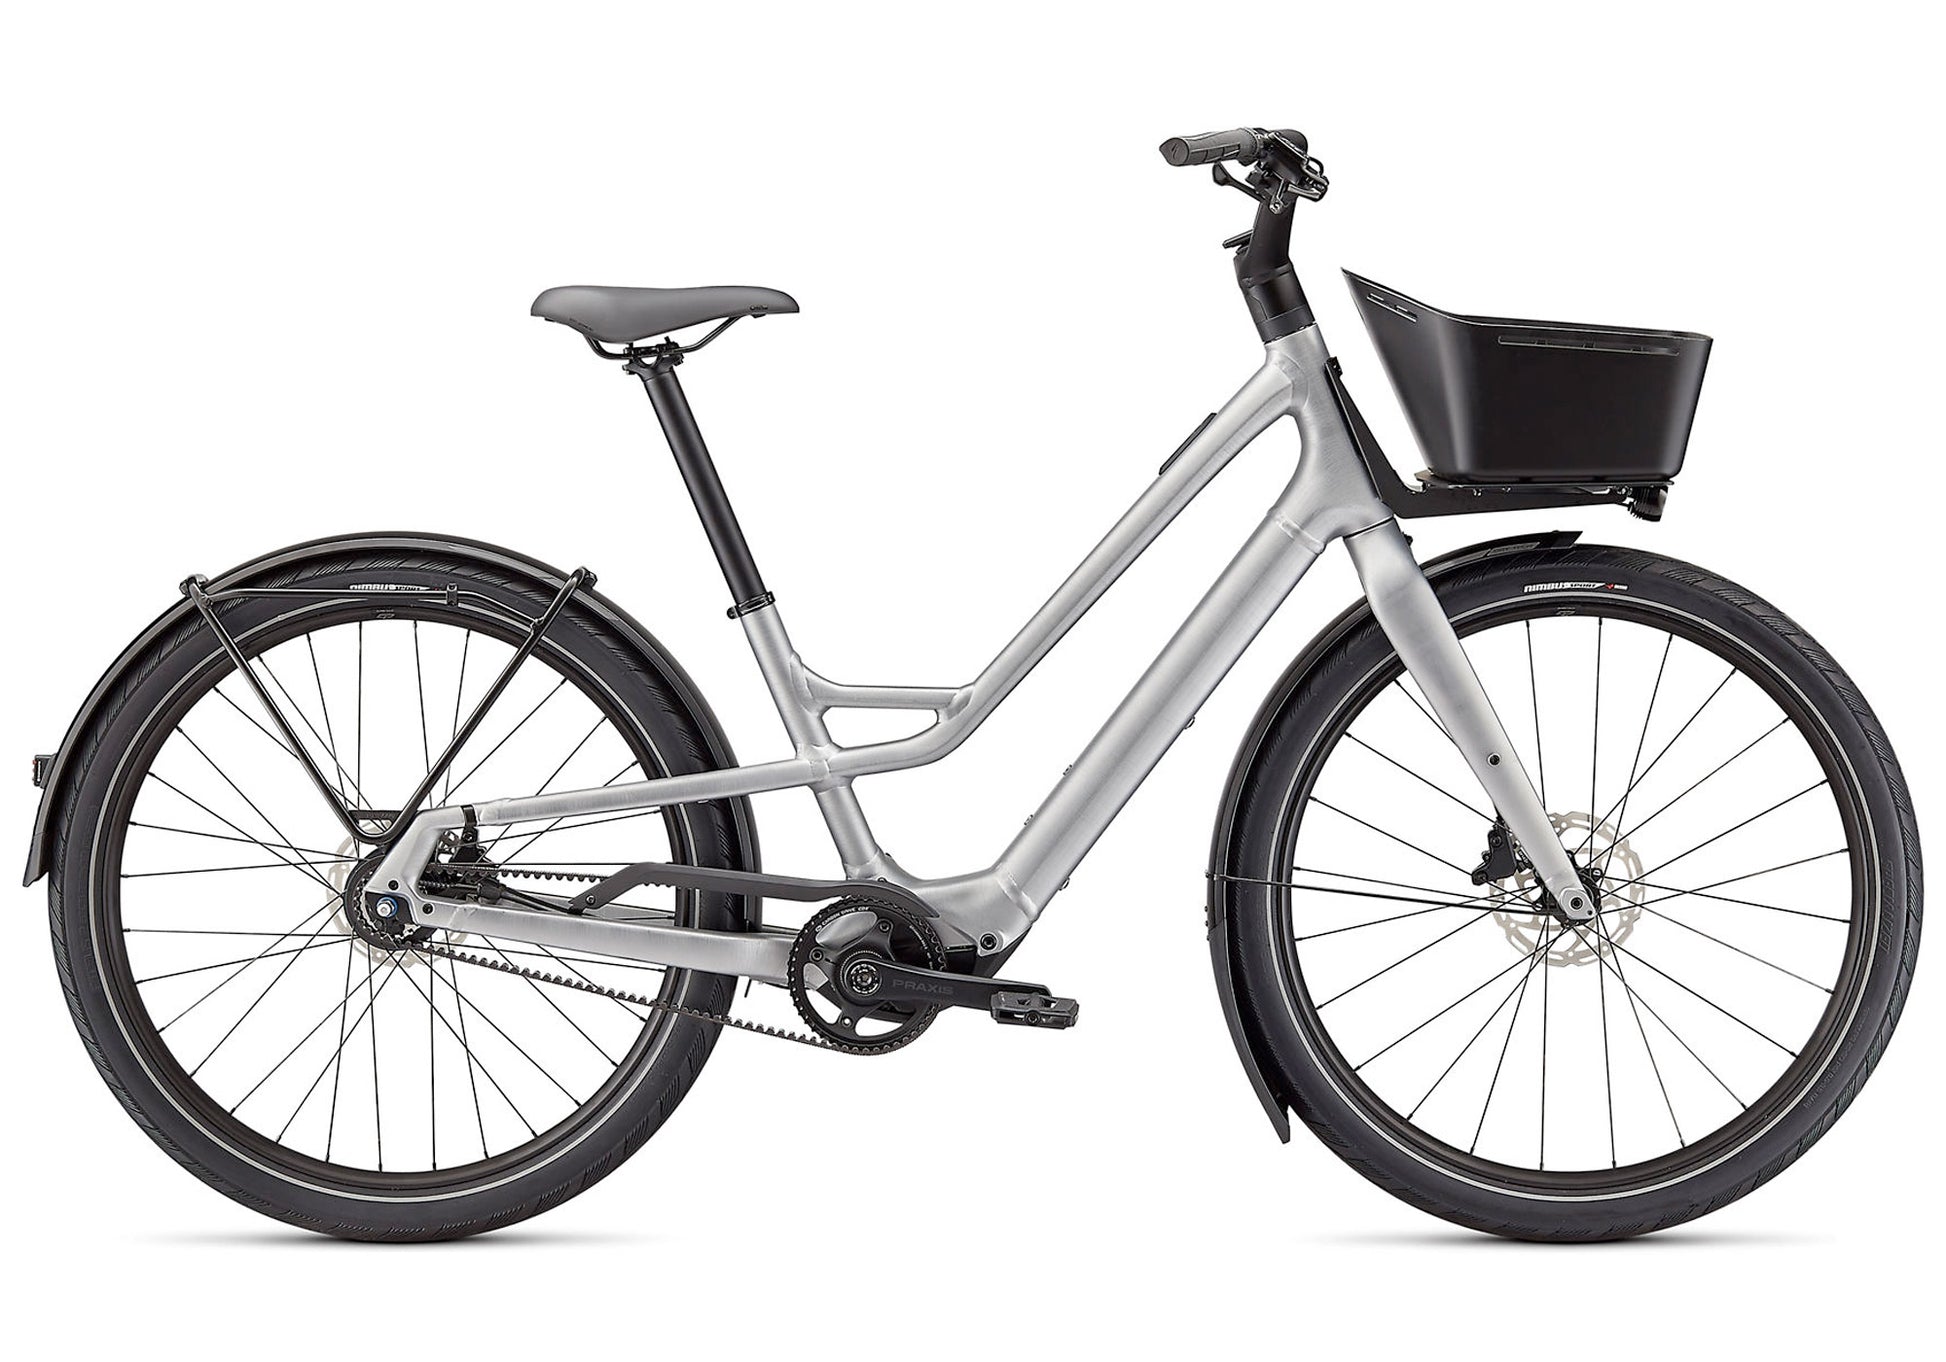 2021 Specialized Turbo Como SL 5.0 - Brushed Silver, buy at Woolys Wheels Sydney, E-bikes by Specialized